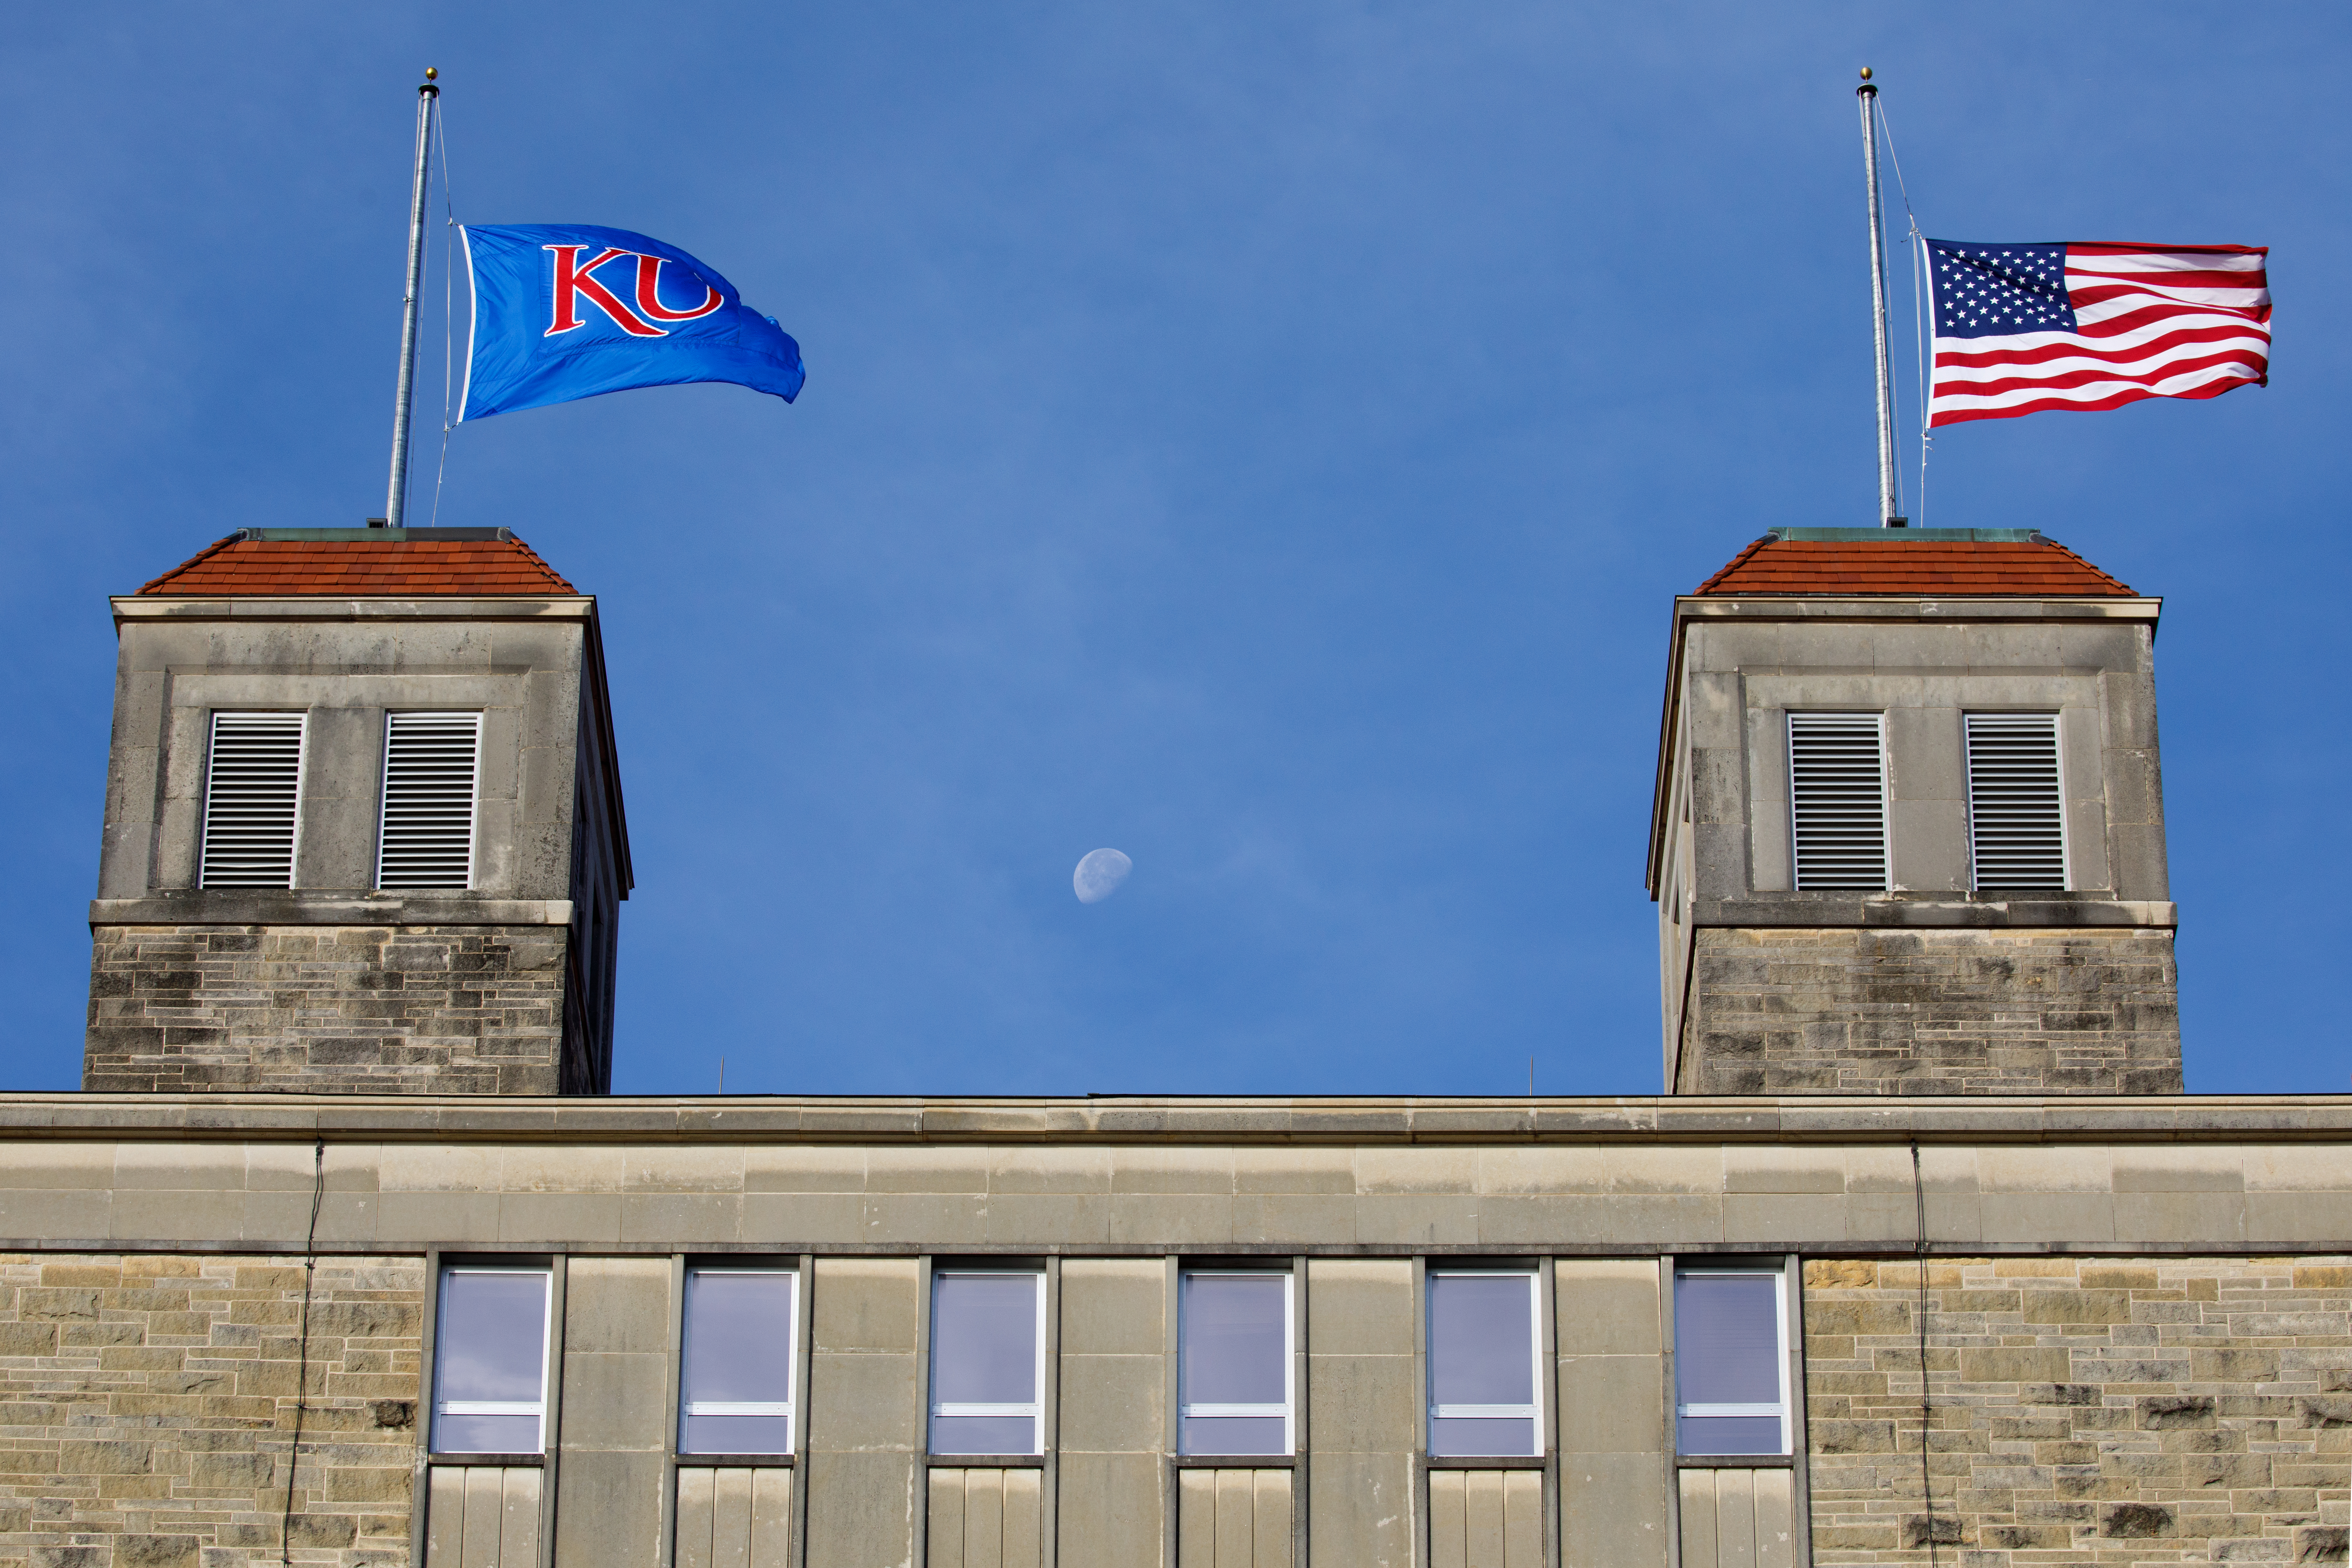 The American flag and KU flag fly atop the cupolas of Fraser Hall